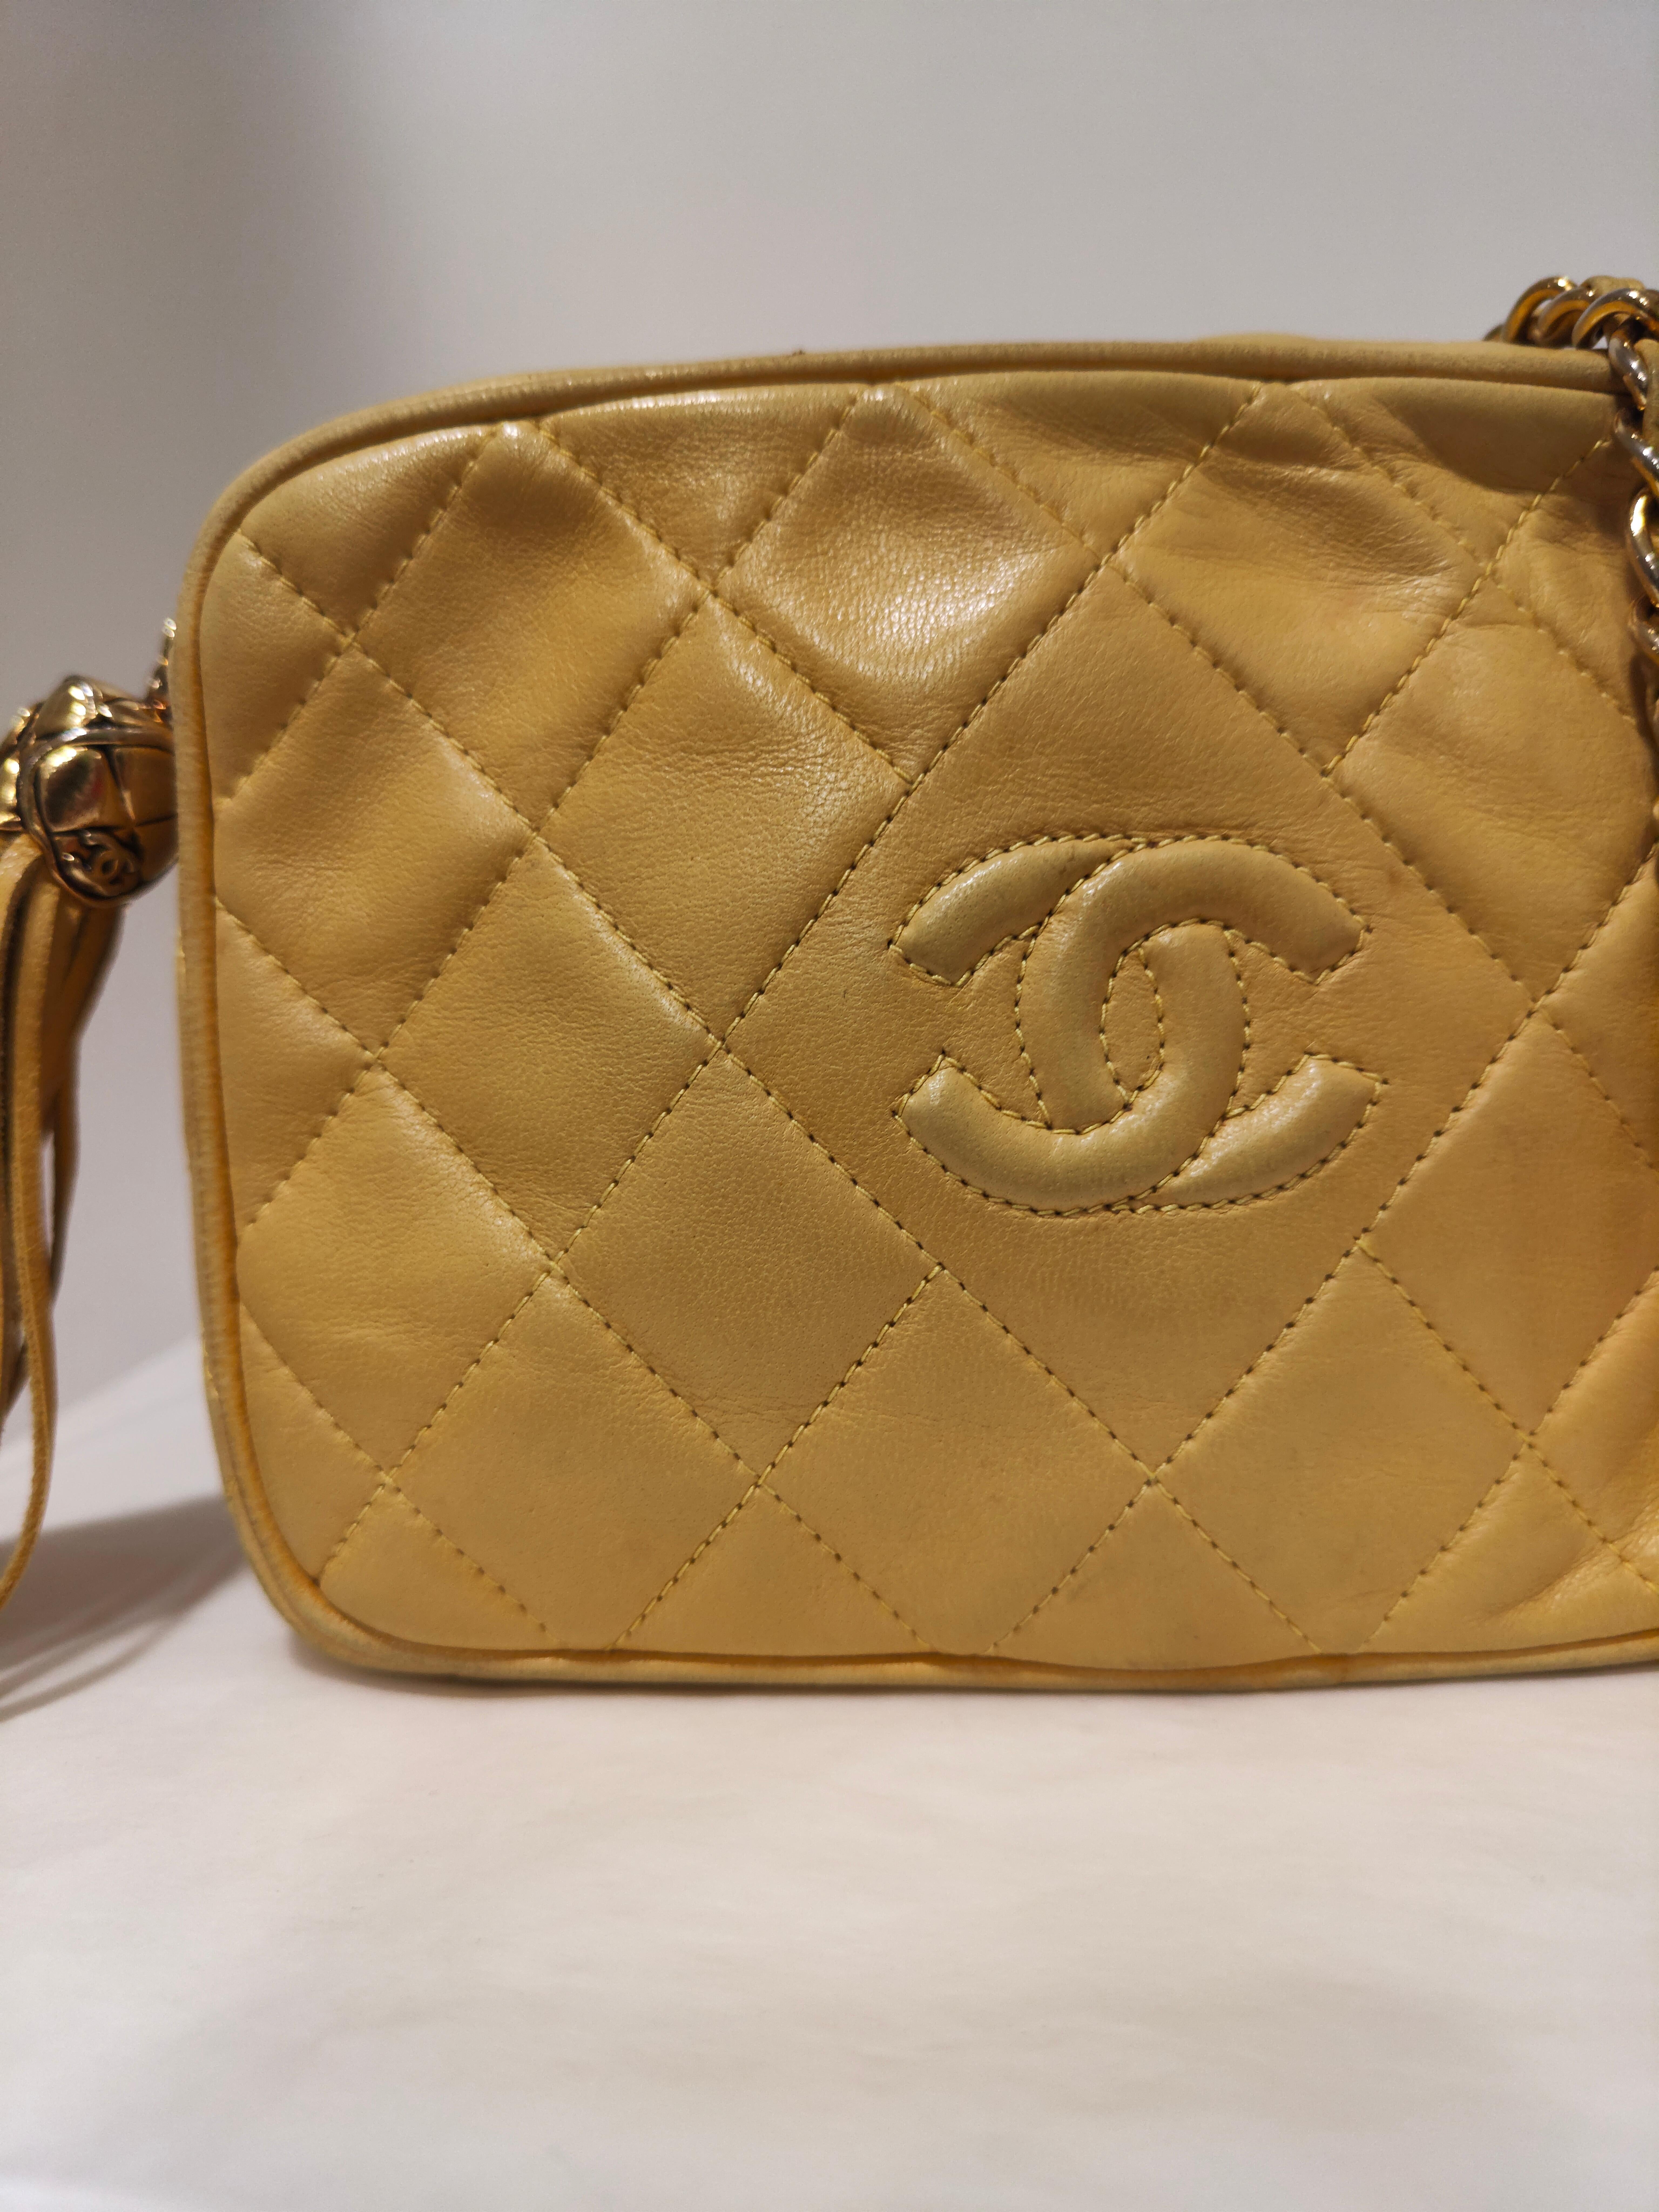 Women's or Men's Chanel Yellow leather camera shoulder bag